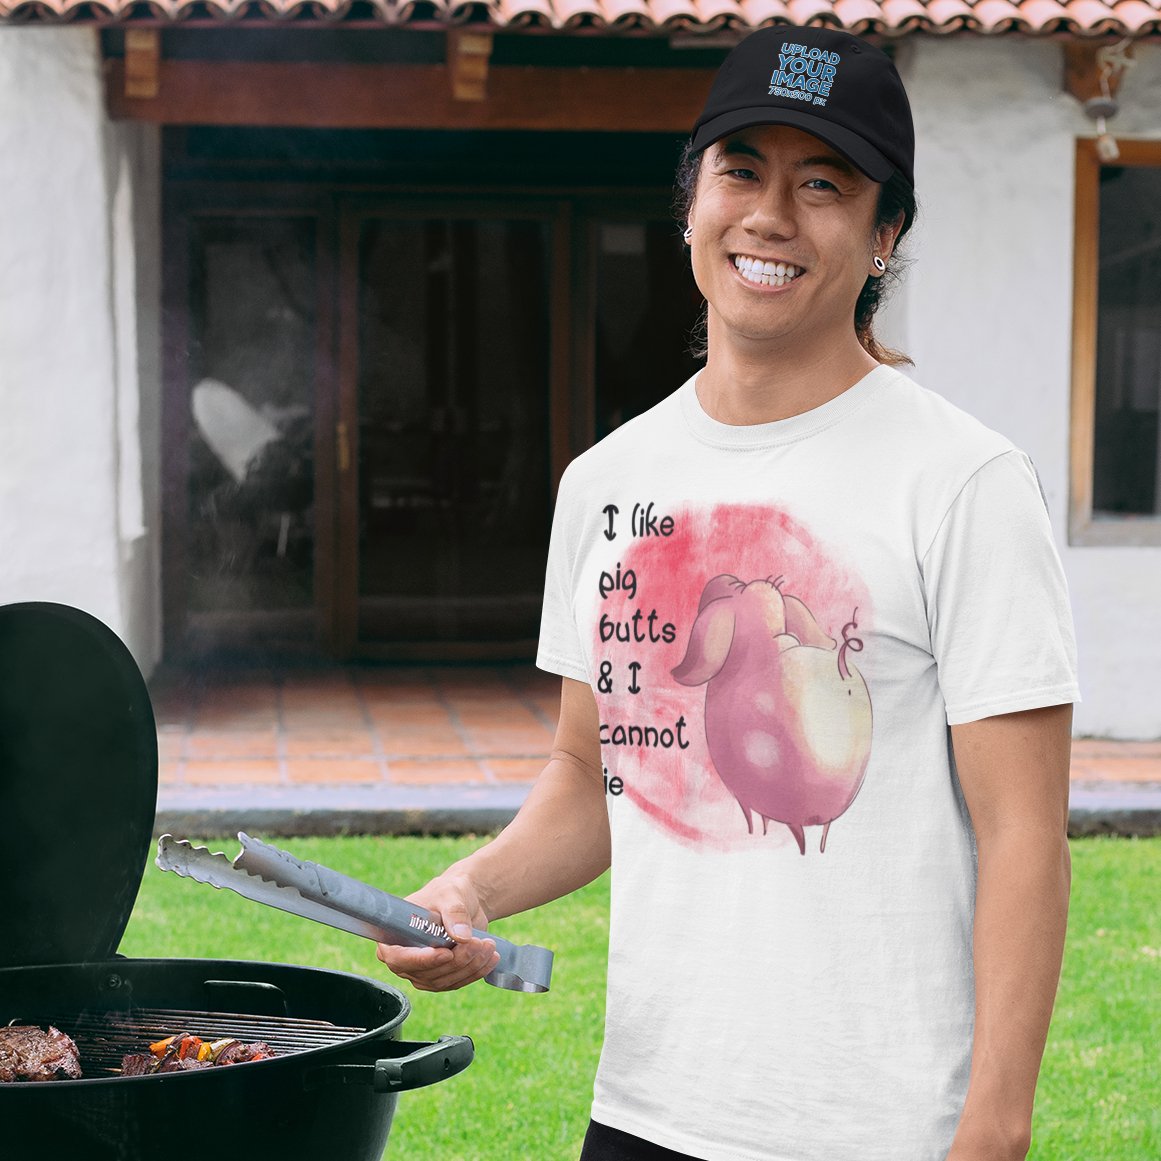 Grill & Swine: 'I Like Pig Butts & I Cannot Lie' BBQ T-shirt – Where Grilling Passion Meets Playful Culinary Humor!